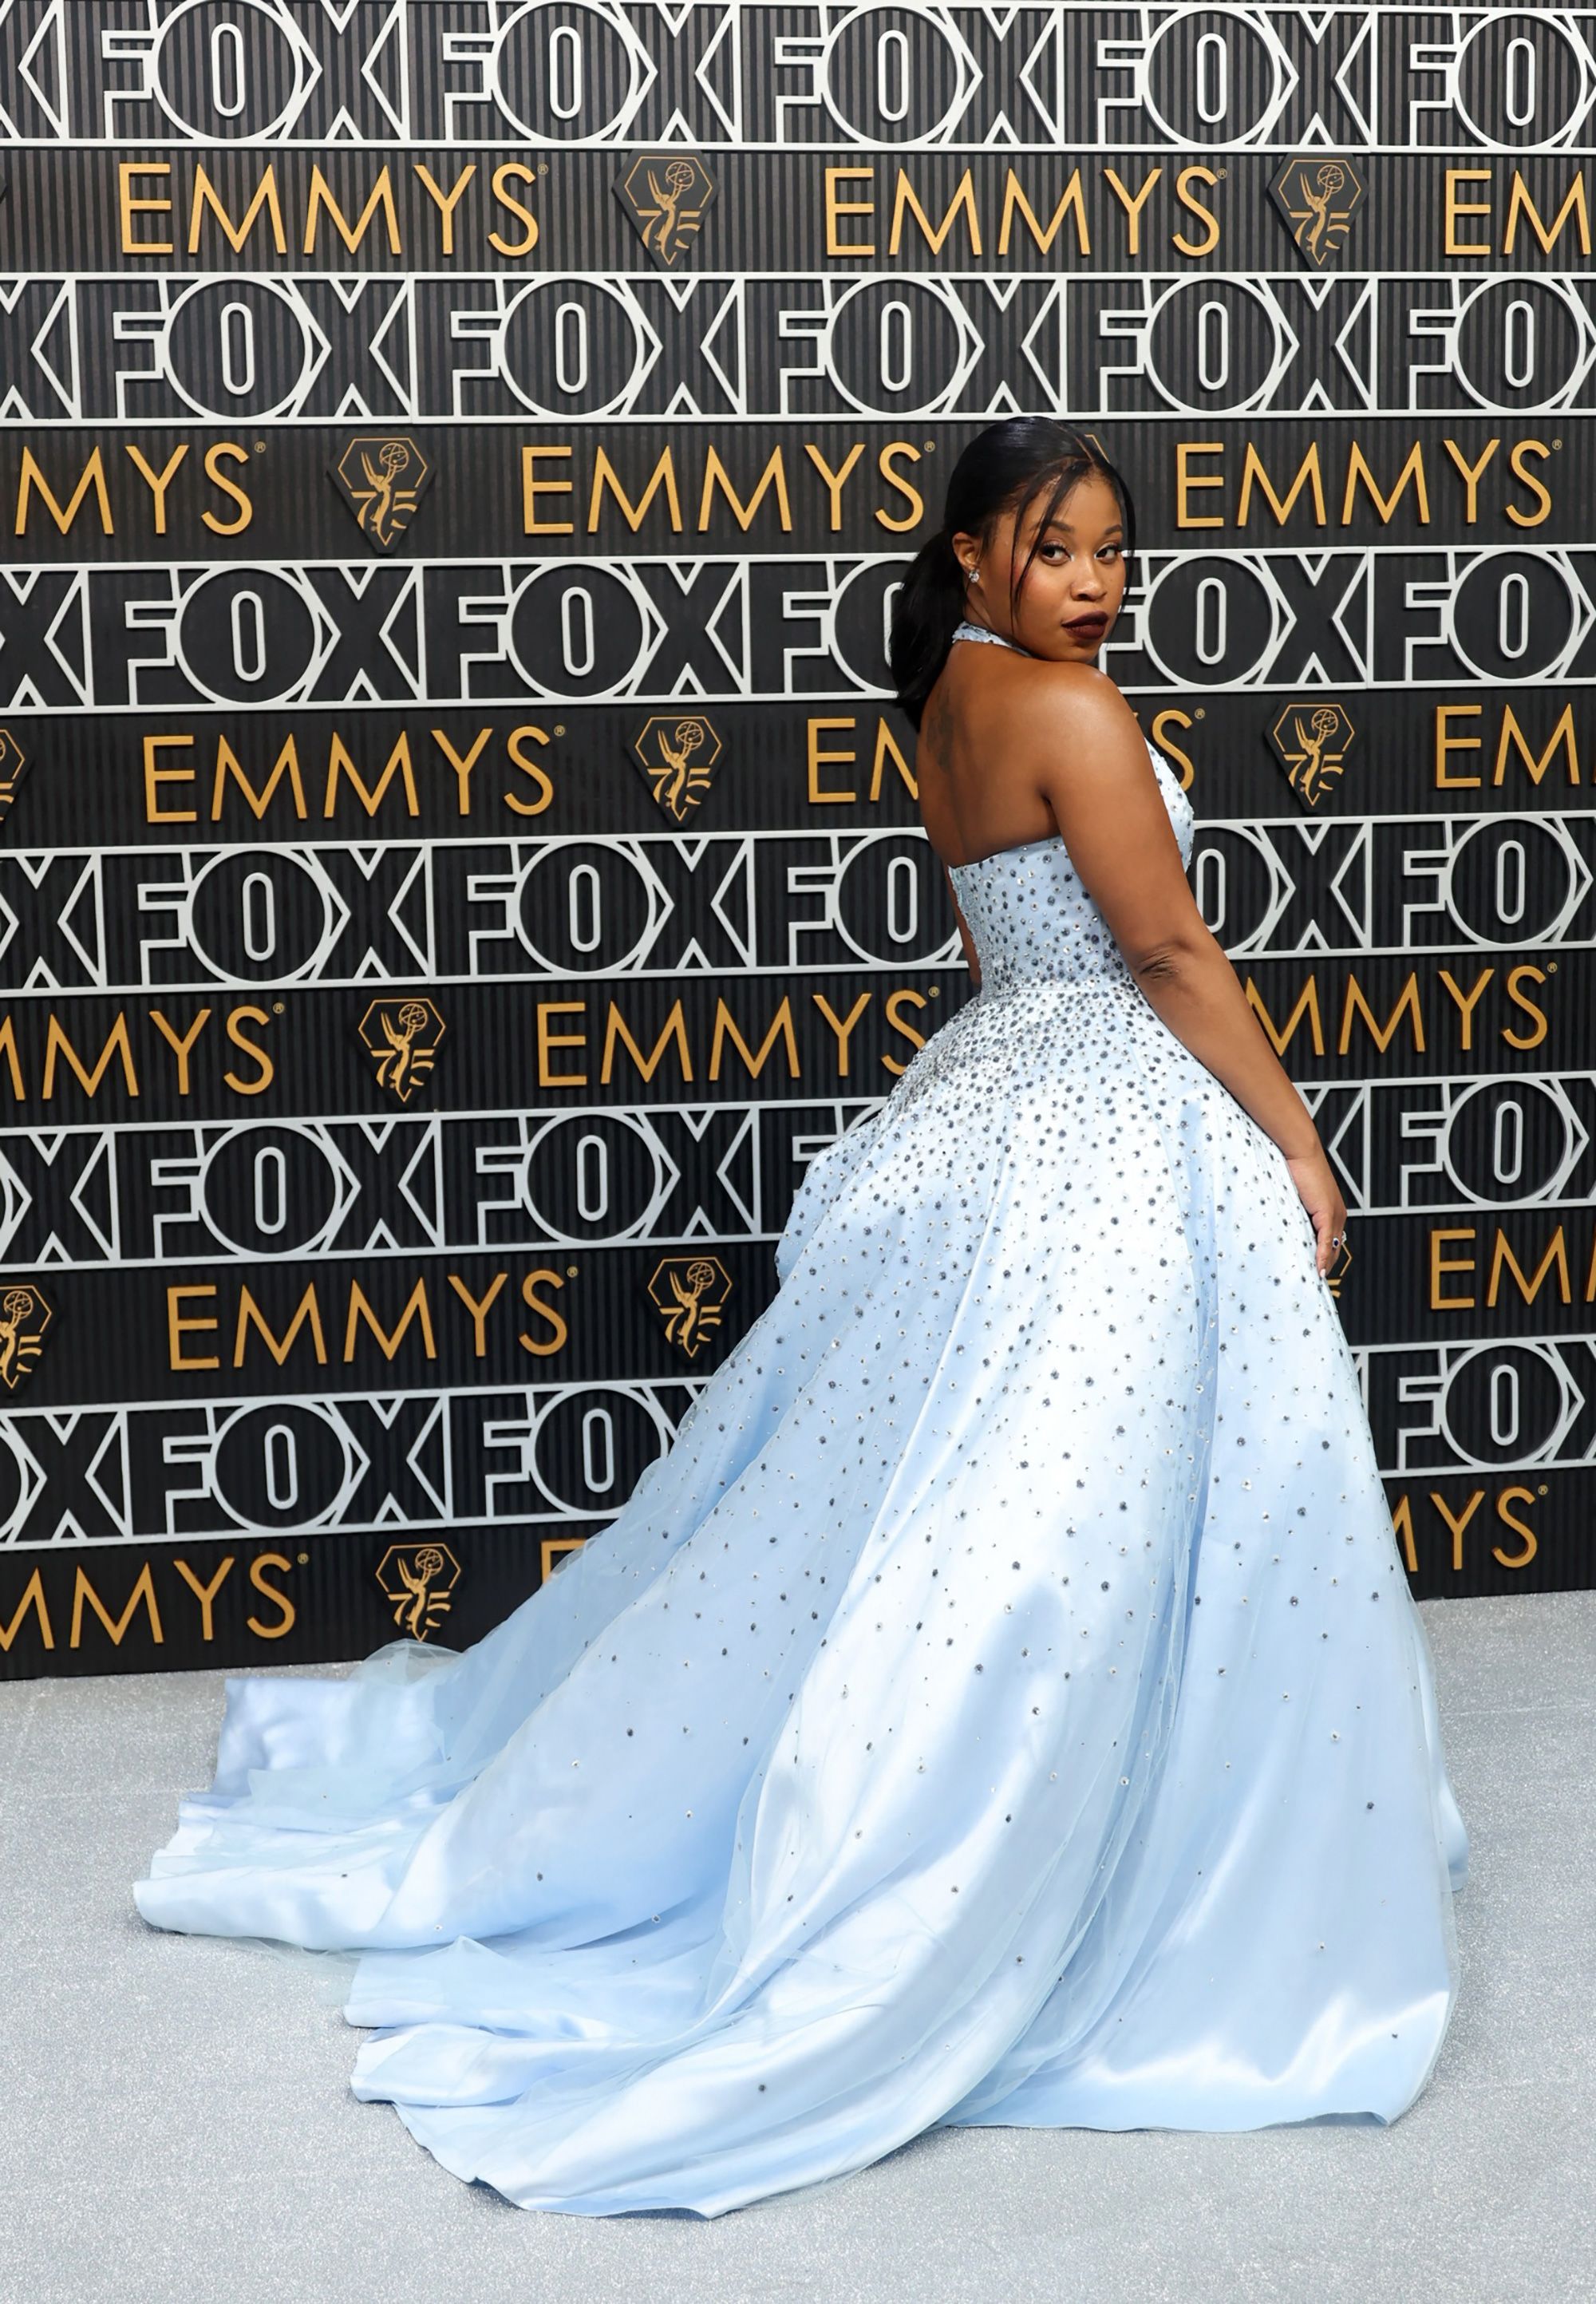 Actor Dominique Fishback, who was nominated for her performance in “Swarm,” stood out in a powder-blue Miu Miu princess gown with jewel detailing.